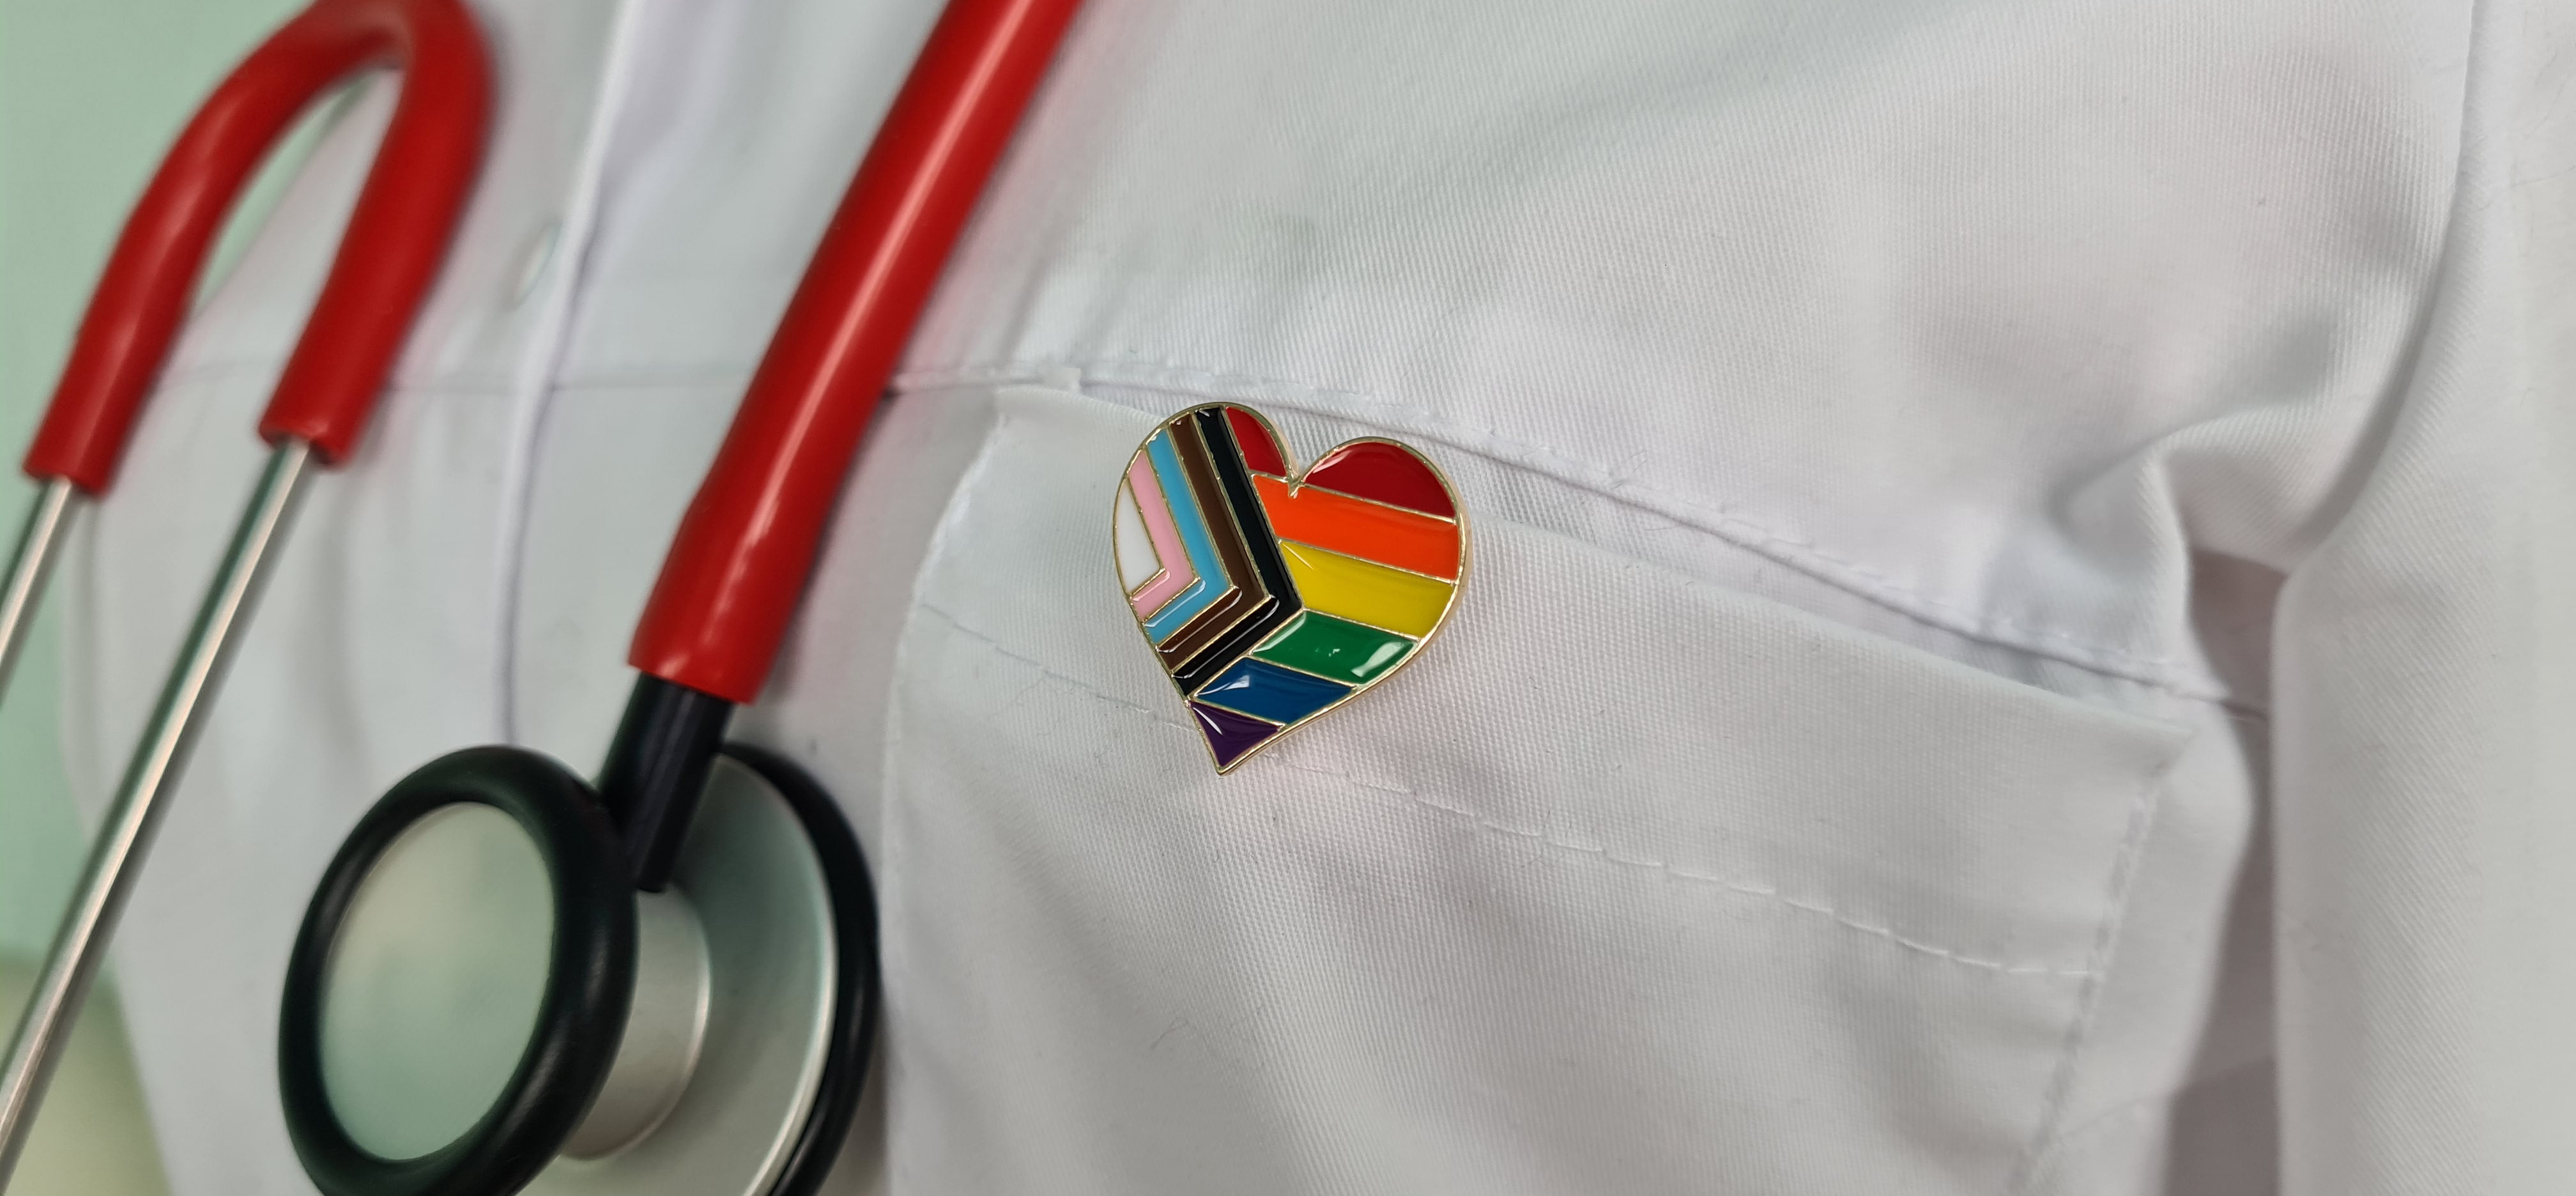 A doctor's coat displays a Progressive Pride pin in the shape of a heart.